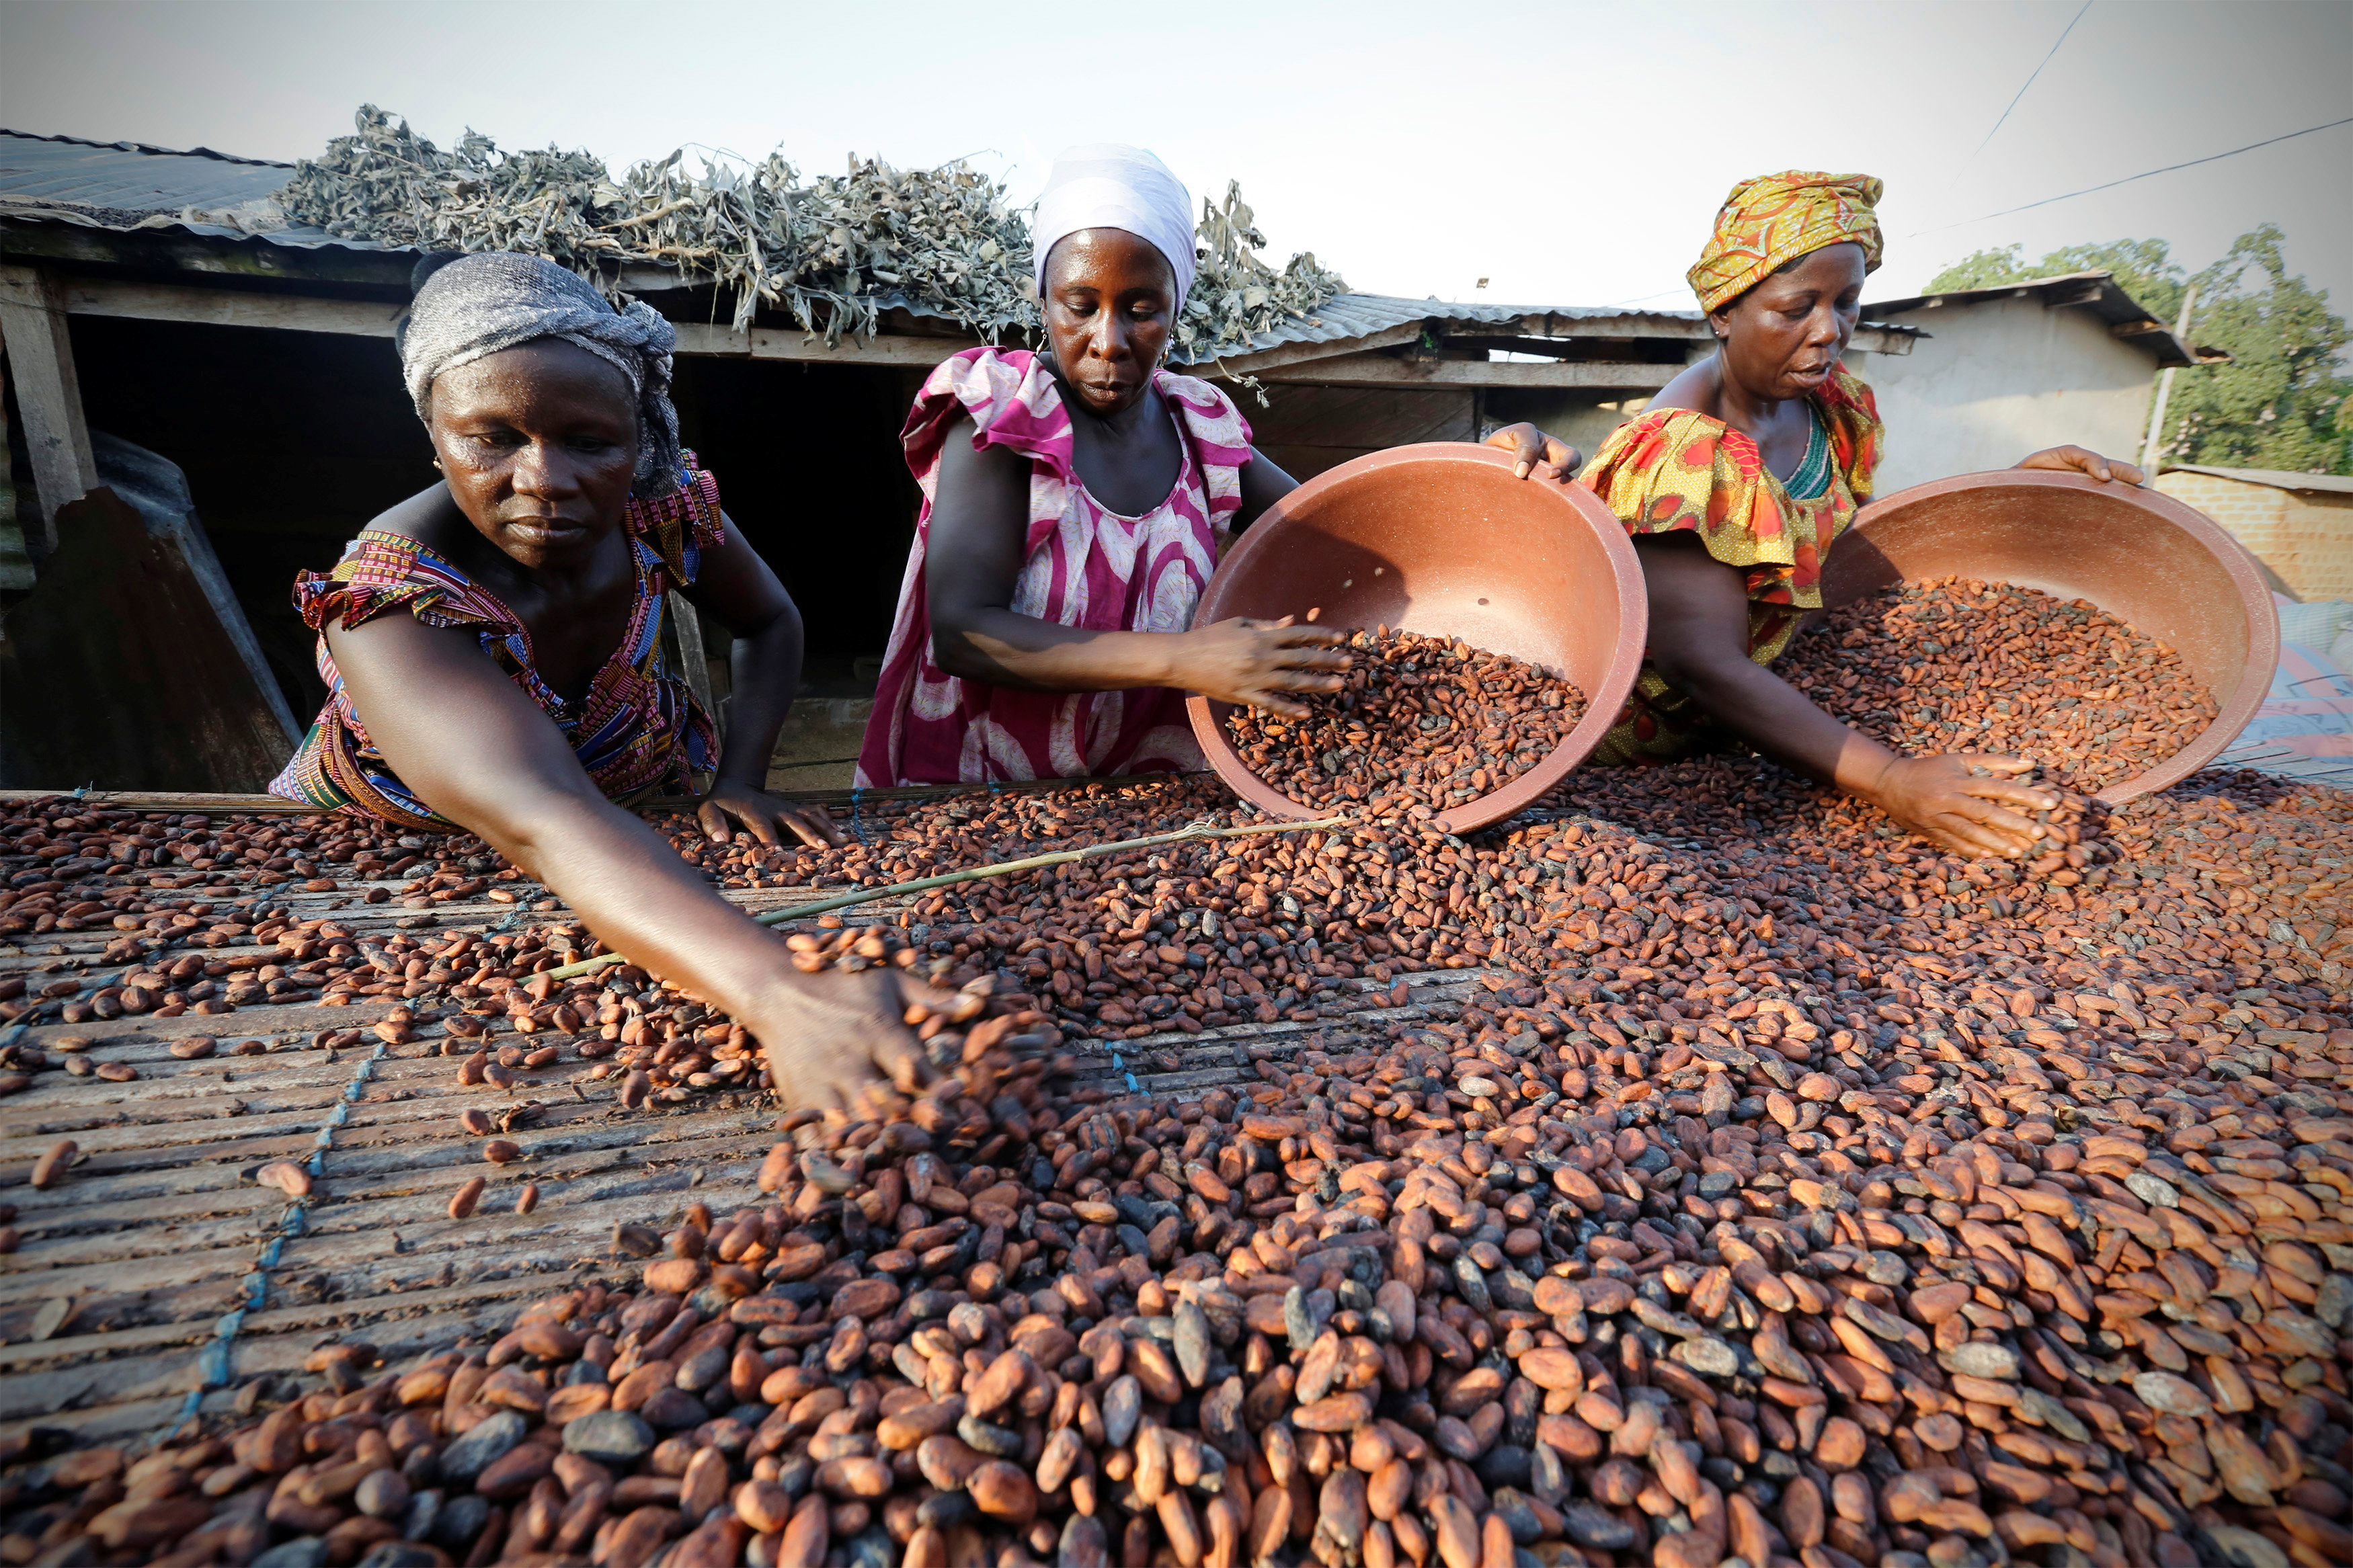 Africa in the Côte d'Ivoire and Ghana set cocoa prices, emerging powers seek to expand influence in Africa, and health officials pledge to end cholera